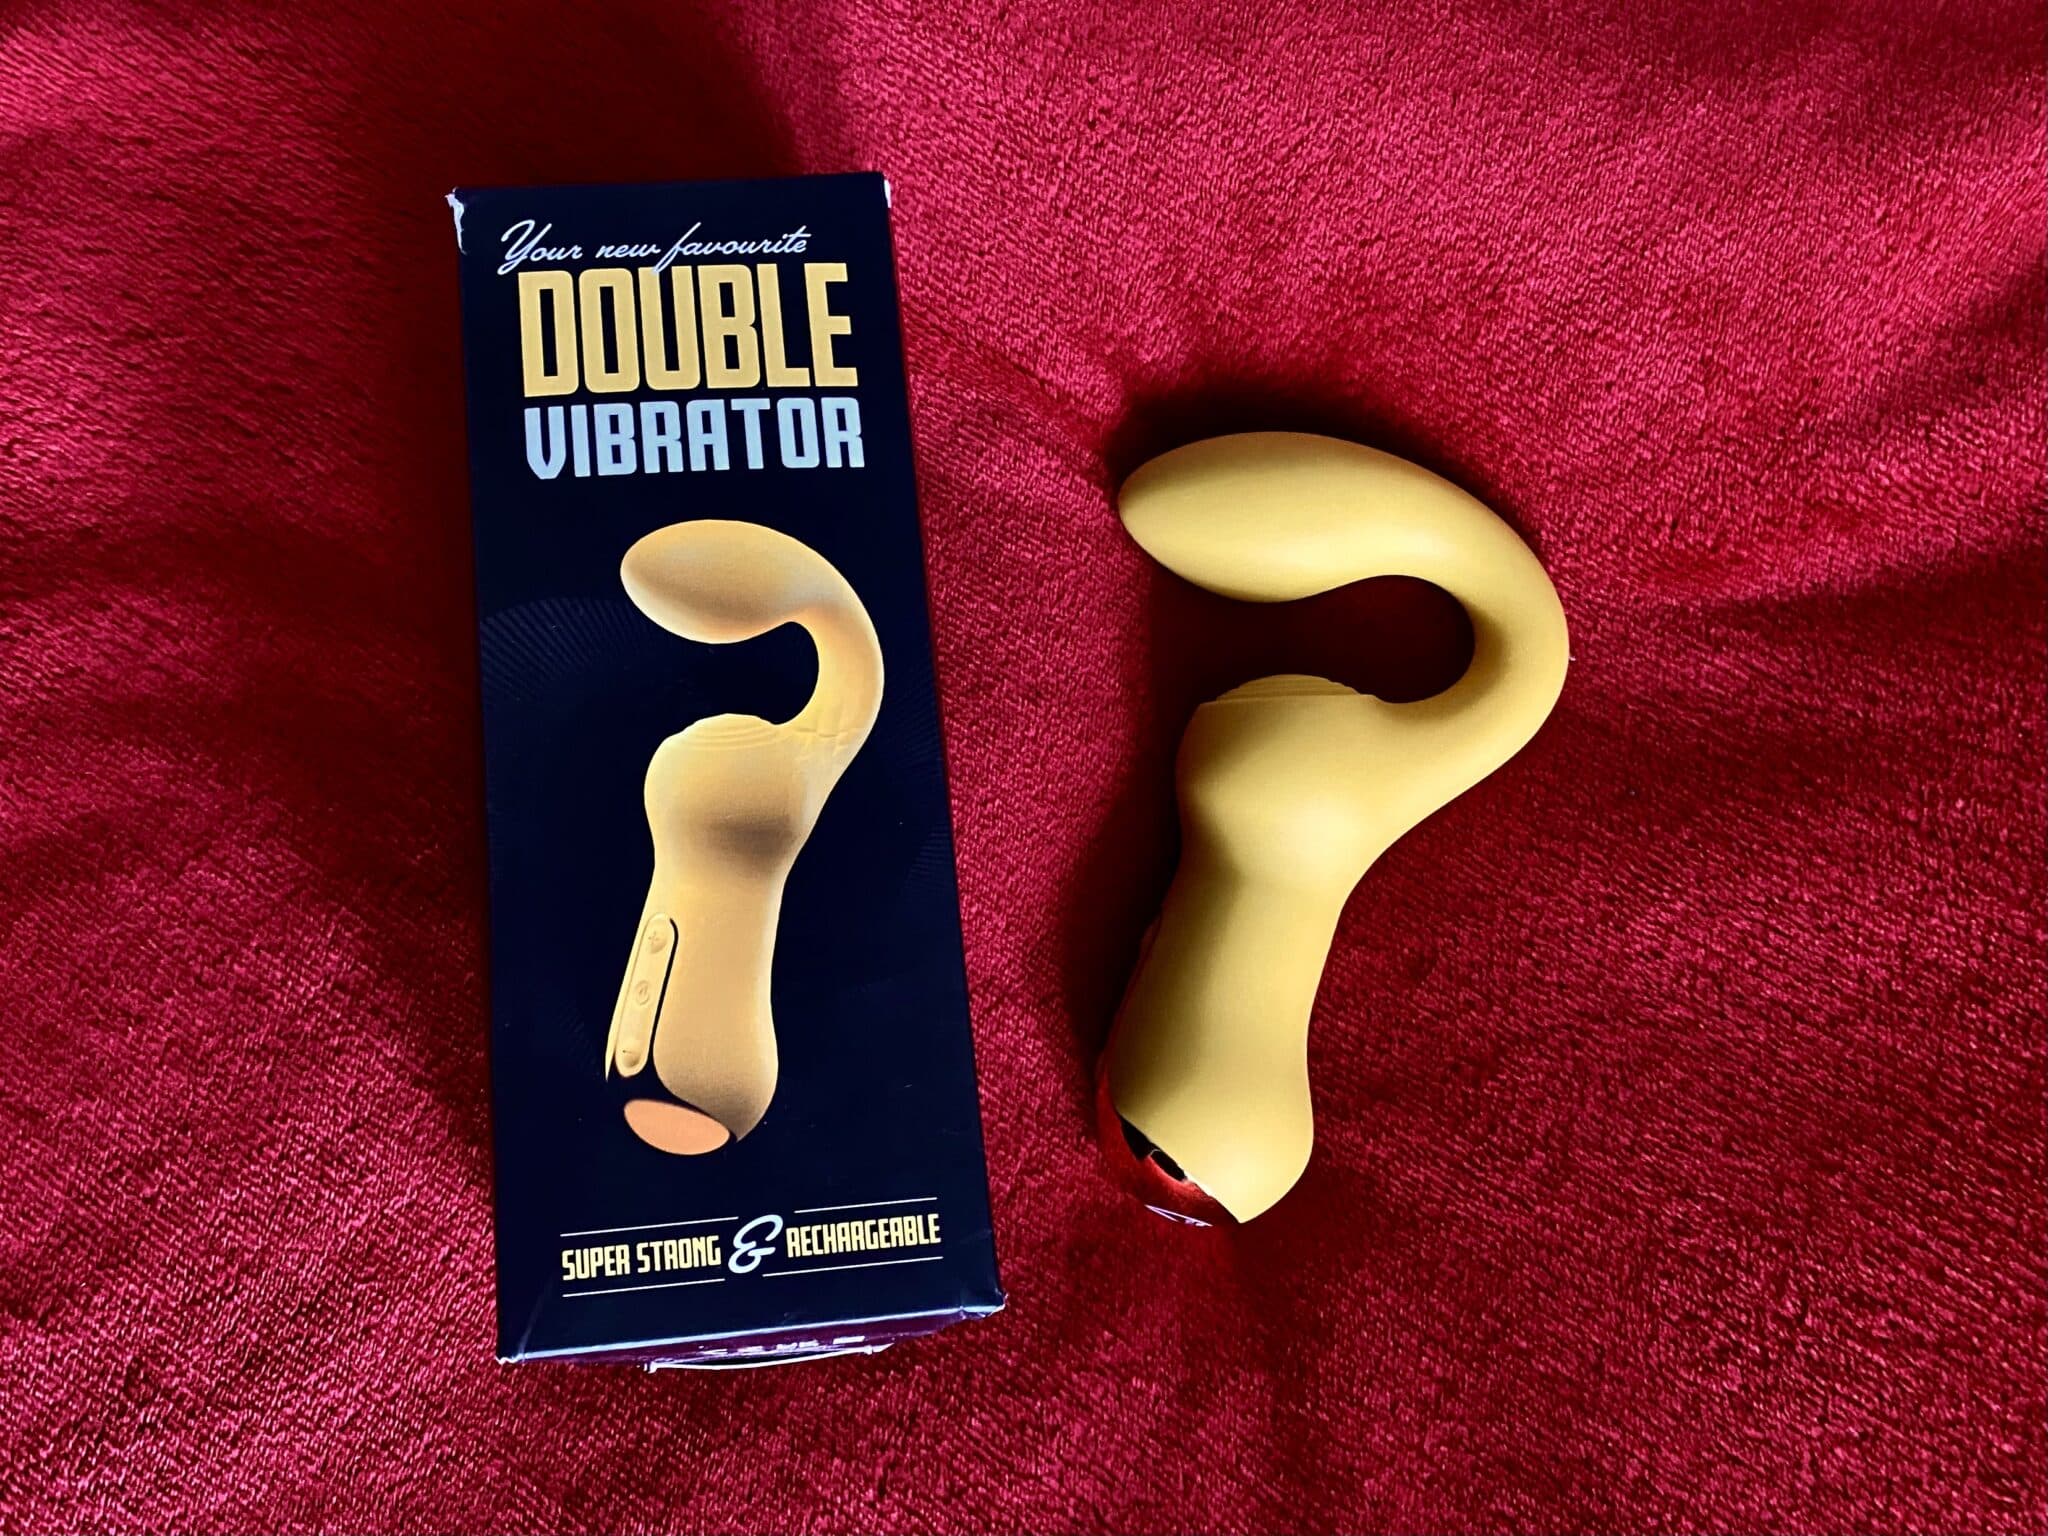 Your New Favorite Double Vibrator A Closer Look at the Your New Favorite Double Vibrator’s Packaging